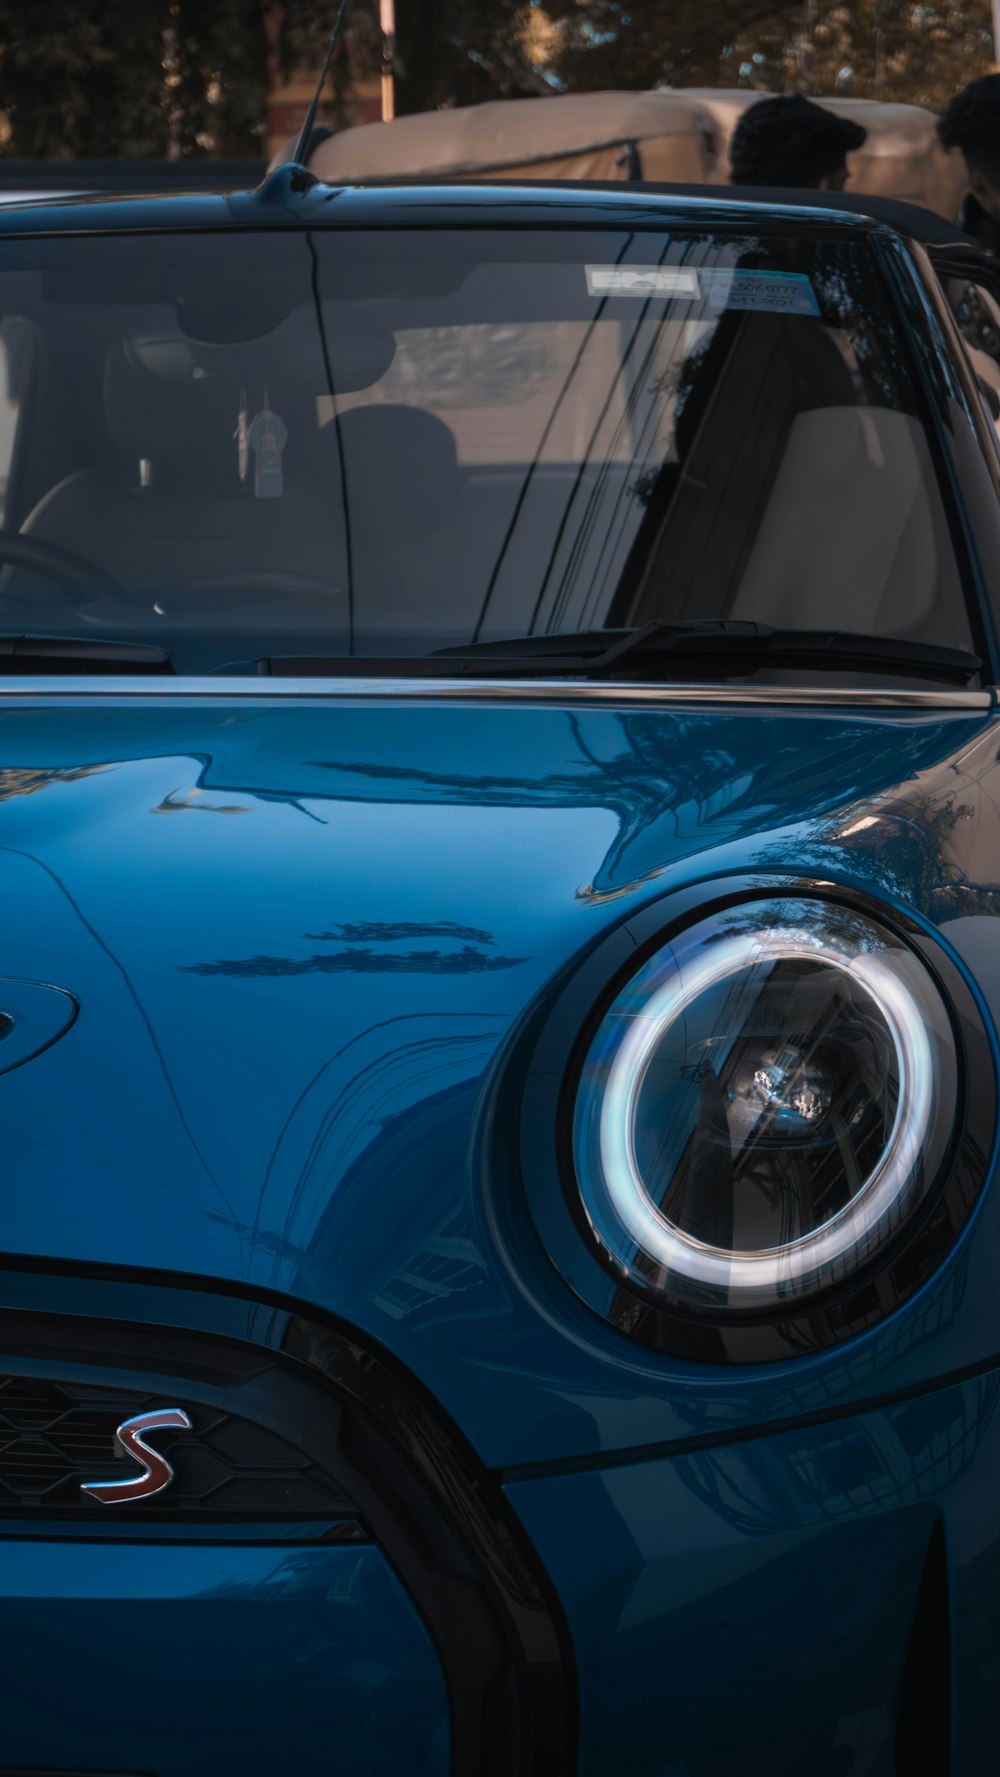 a close up of the front of a blue mini cooper cooper cooper cooper cooper cooper